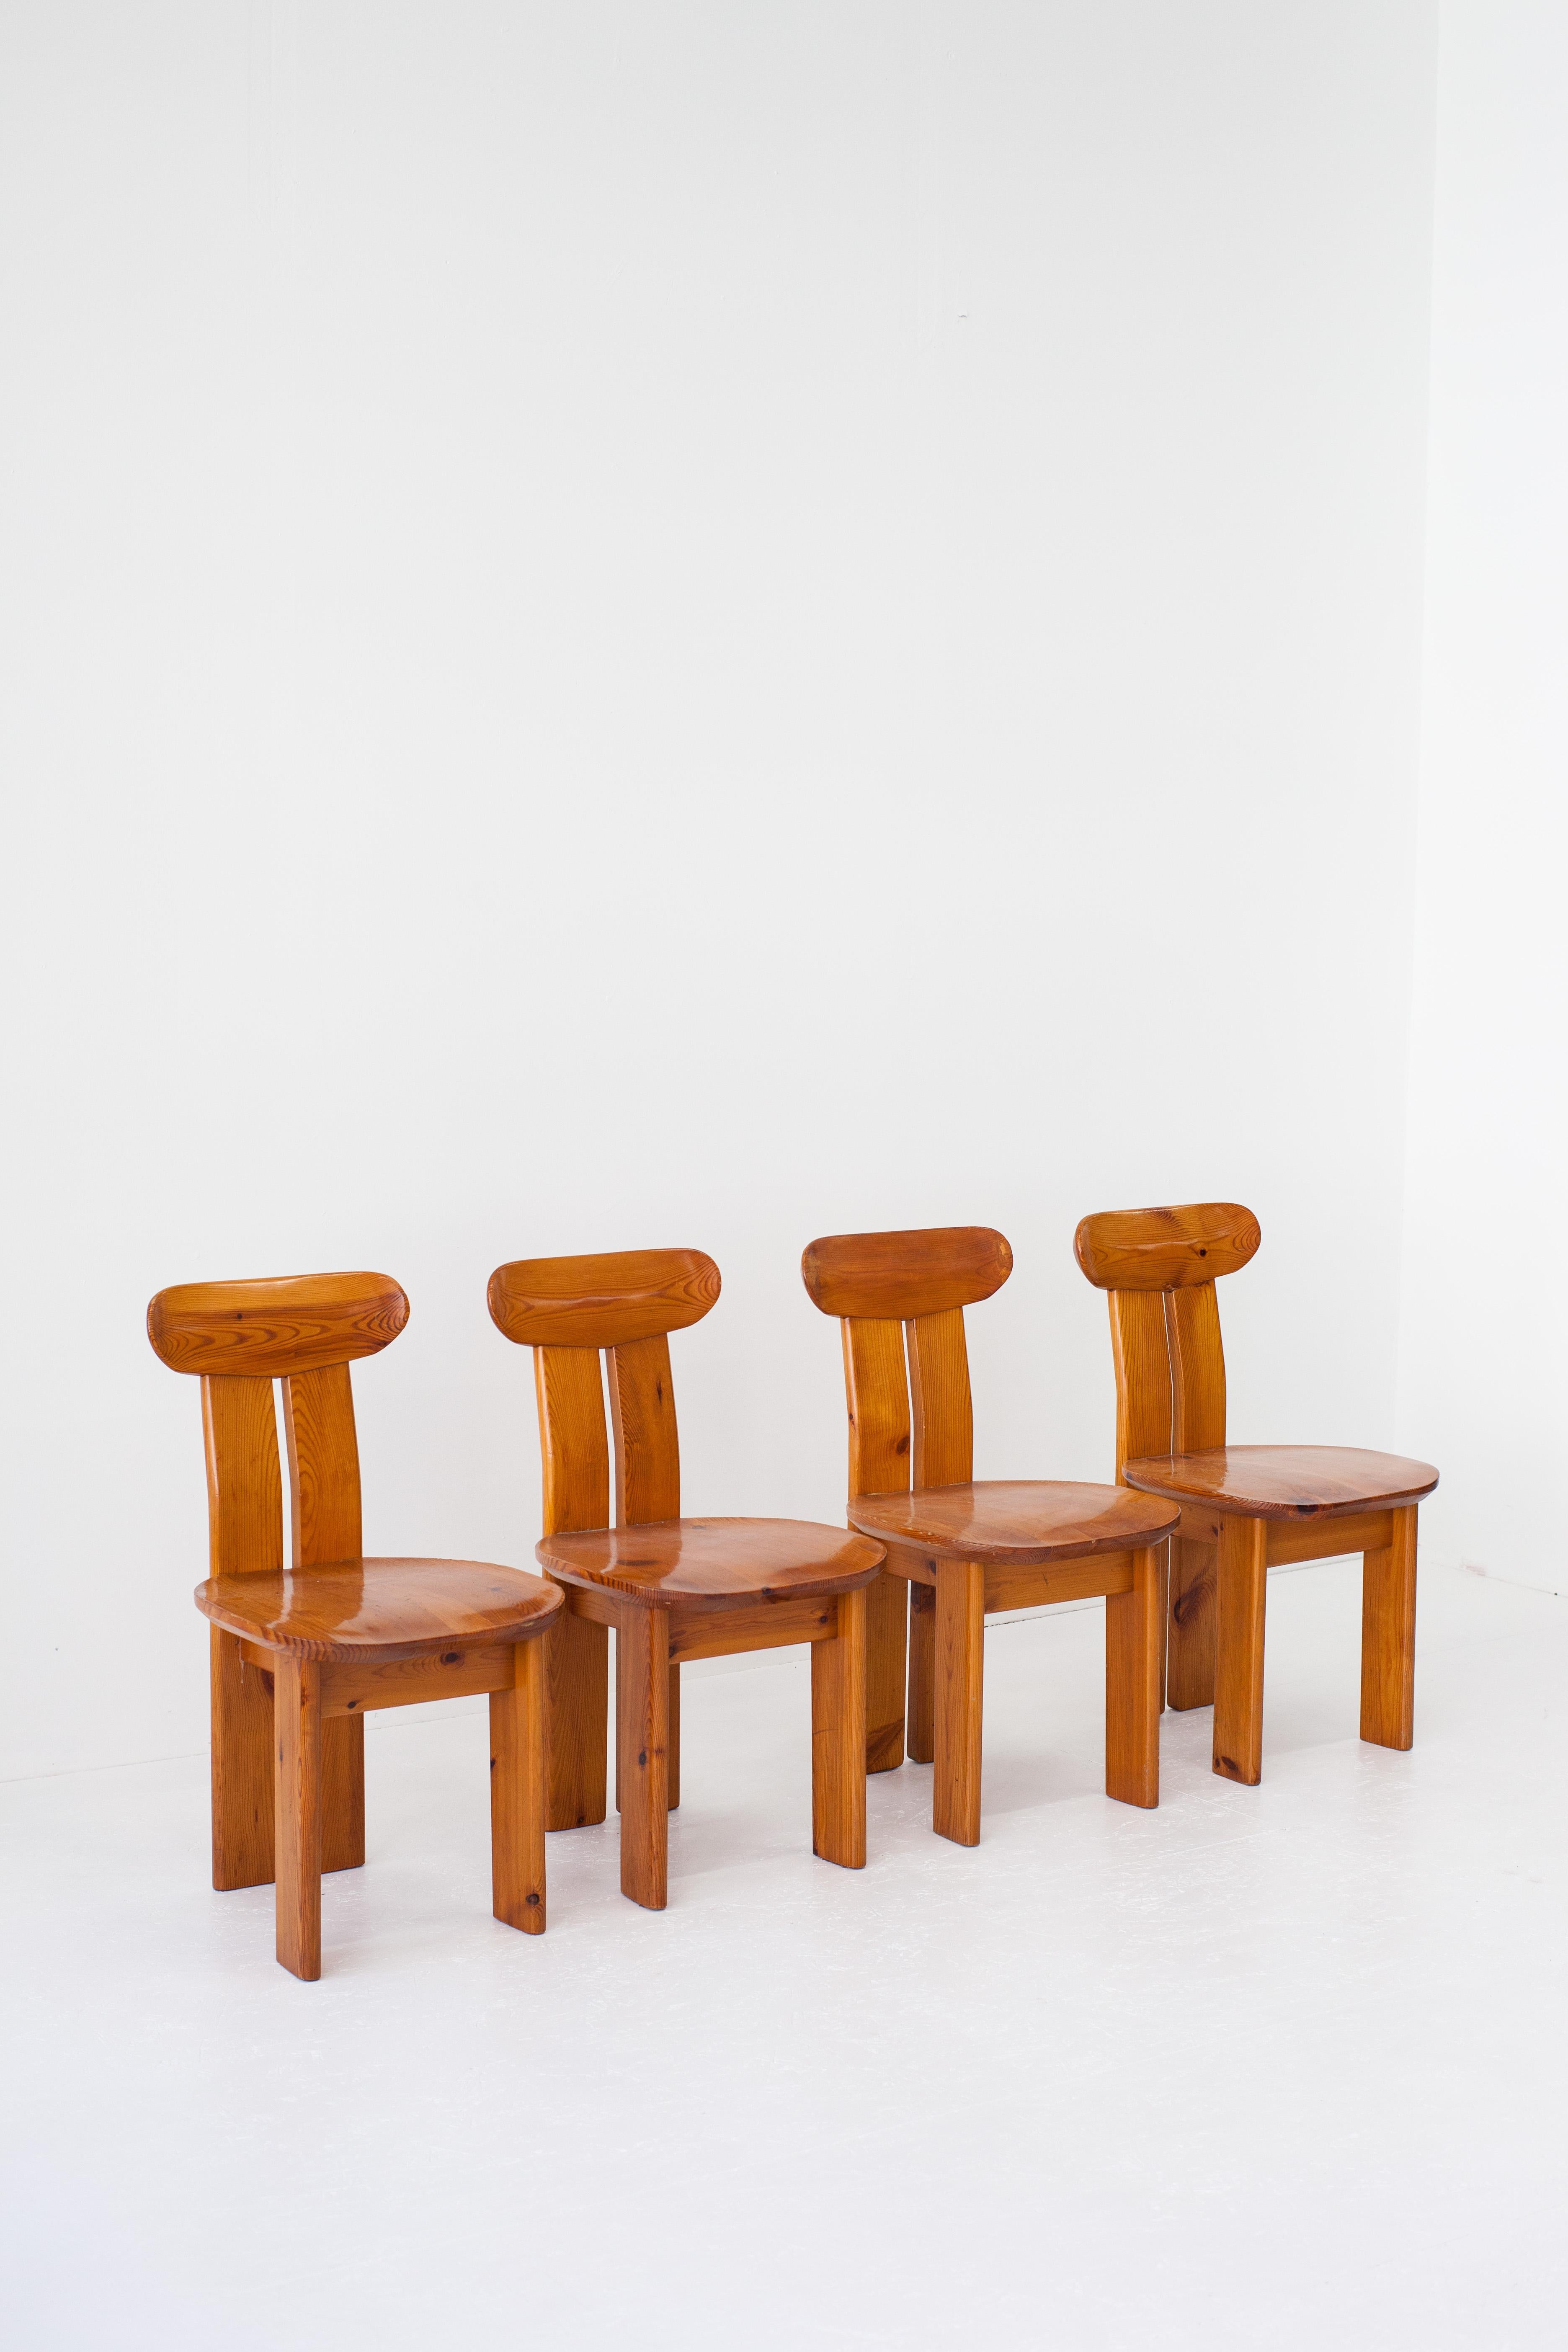 

These remarkable dining chairs embody a sculptural aesthetic evoking the spirit of 1970s Italian design and craftsmanship. While the exact designer remains unknown, their craftsmanship bears a strong resemblance to the style of Mario Marenco and